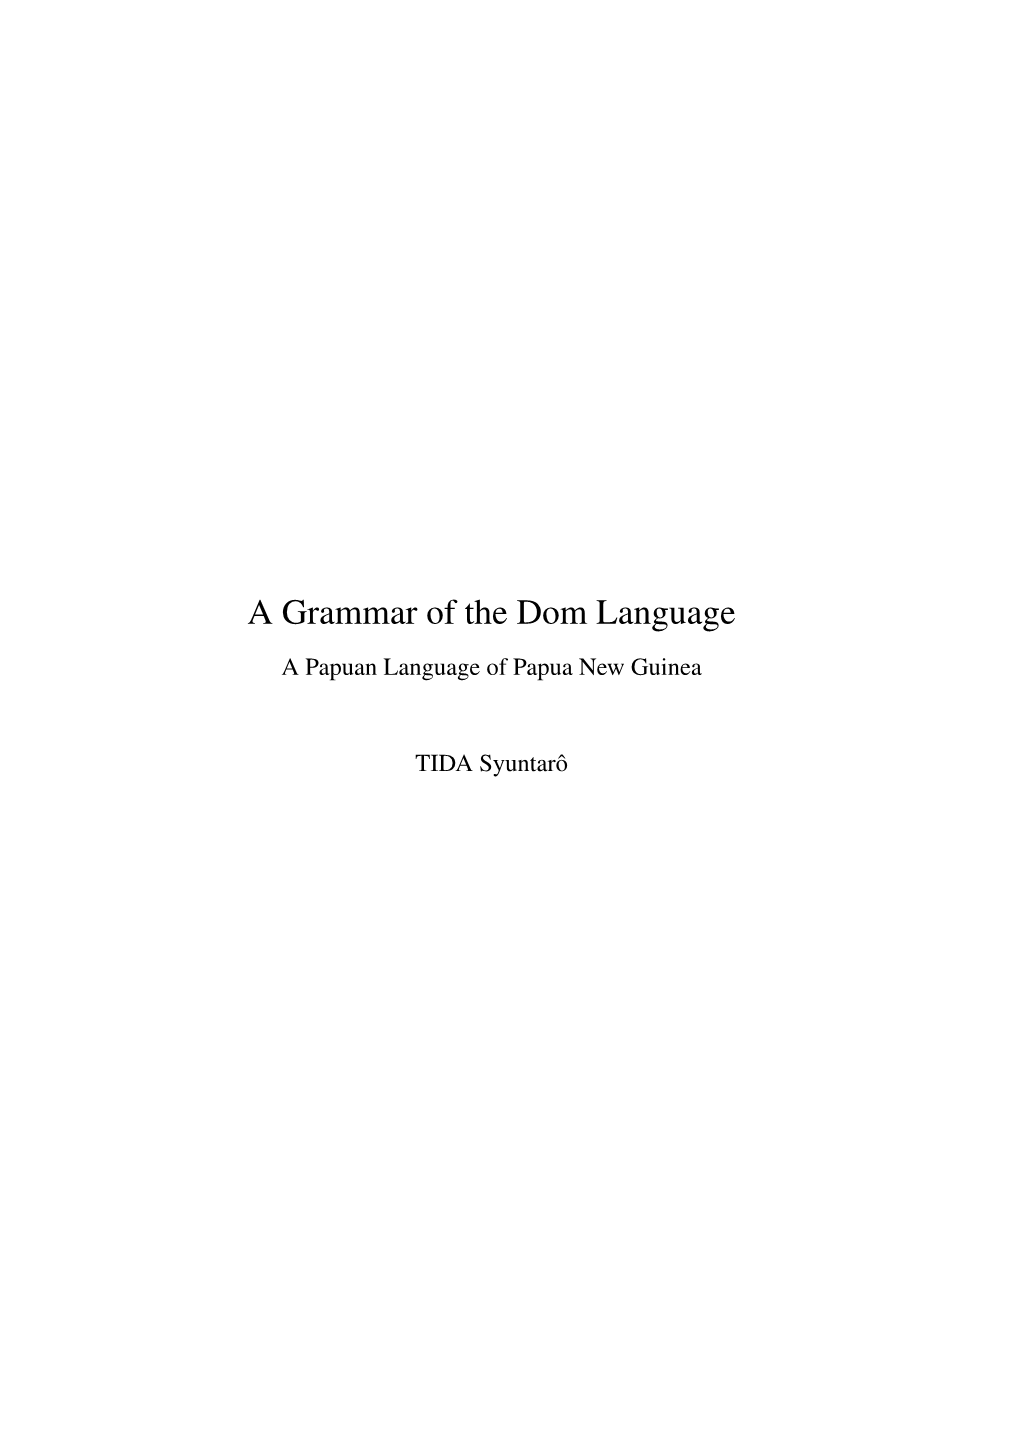 A Grammar of the Dom Language a Papuan Language of Papua New Guinea